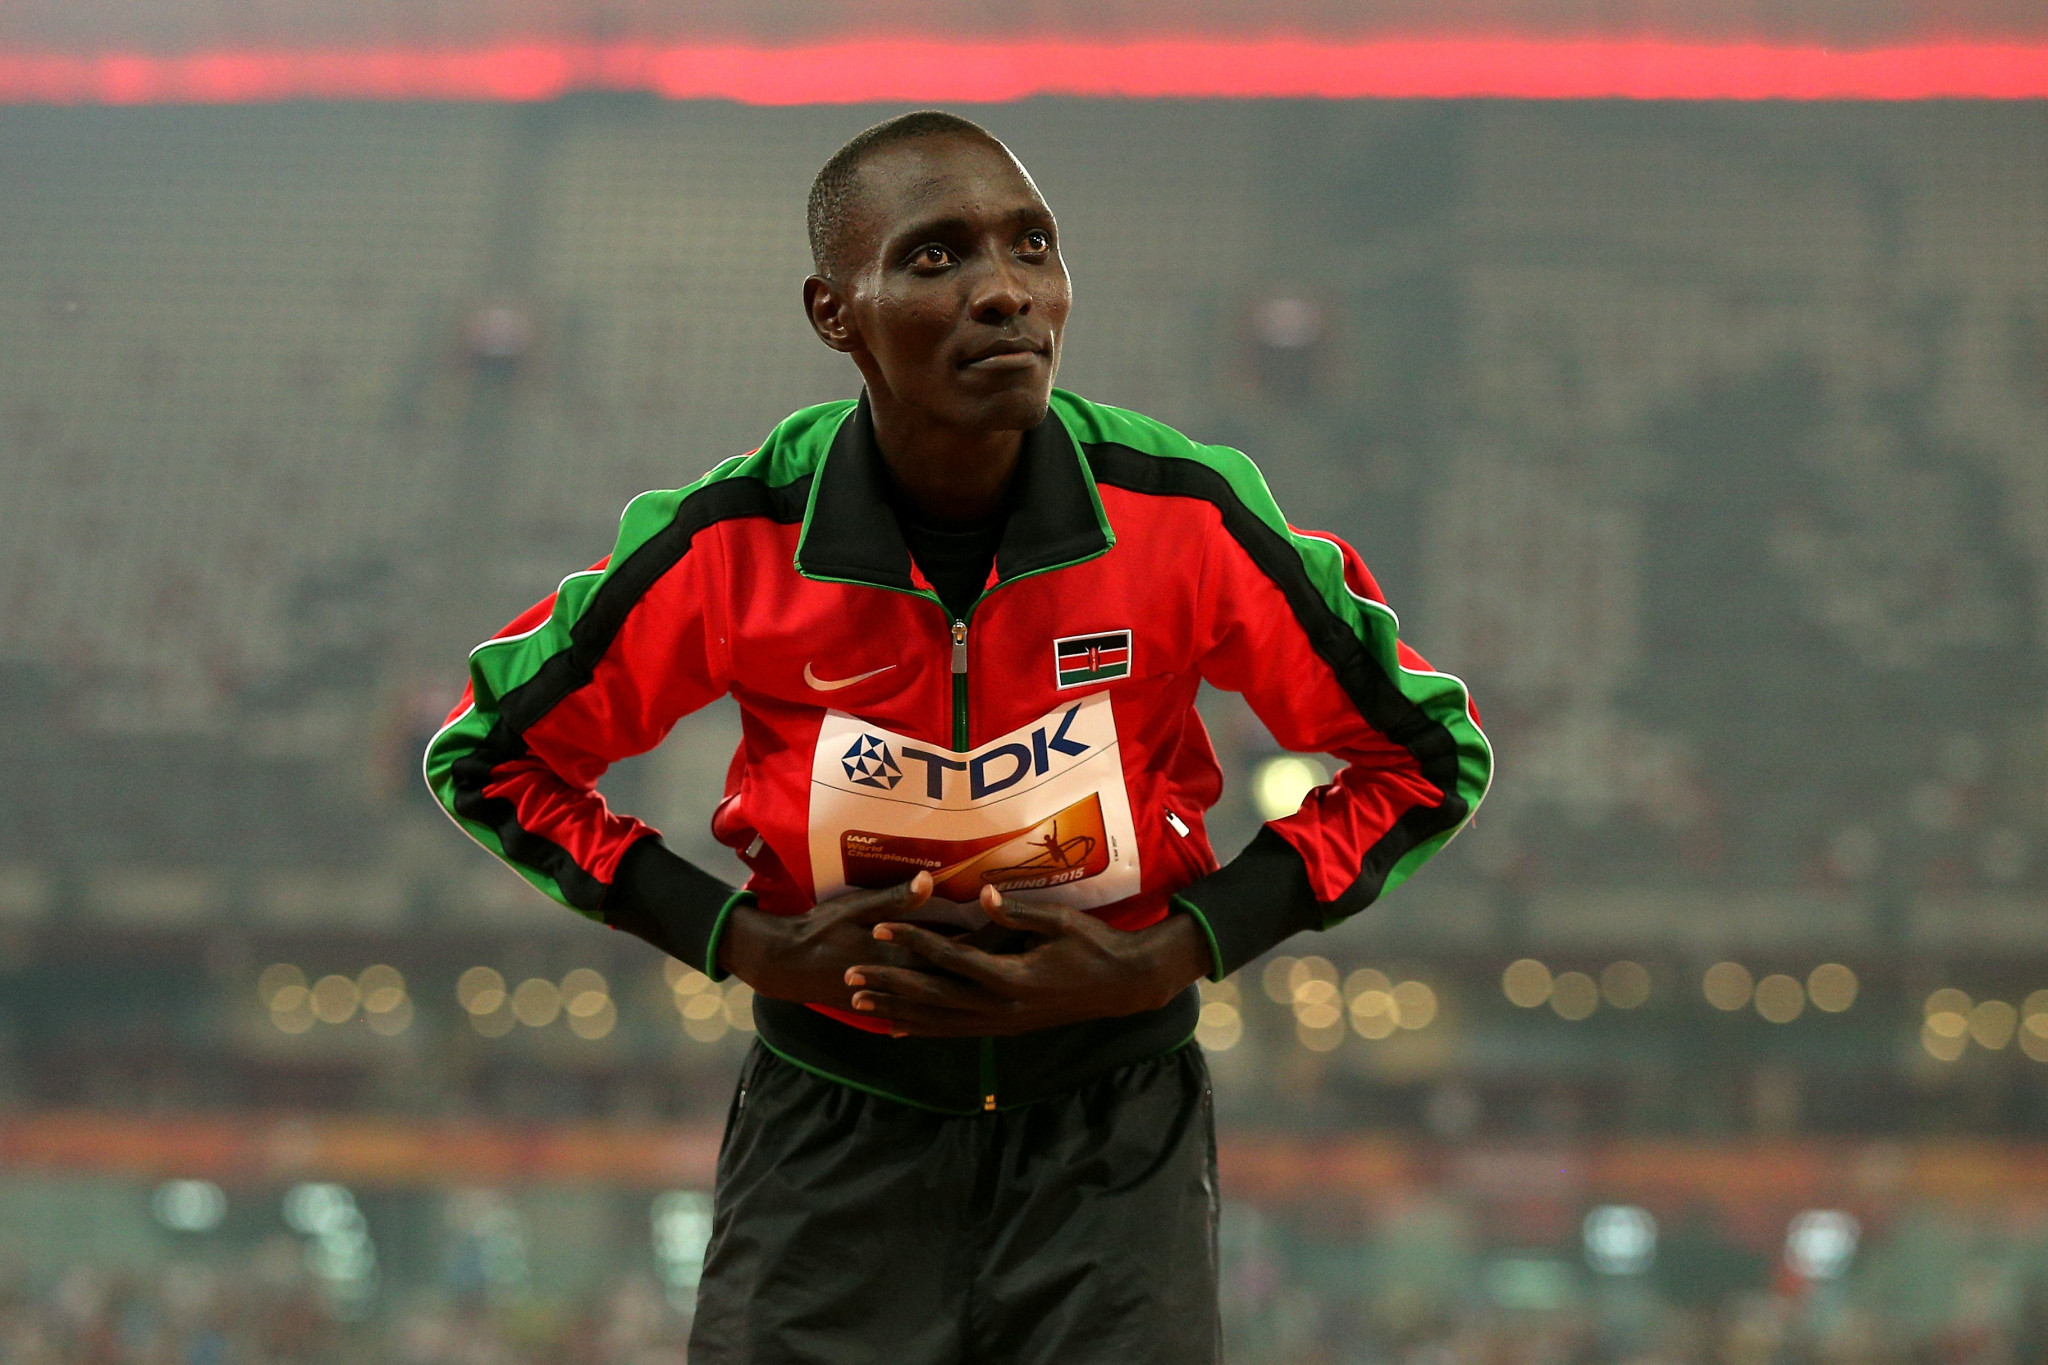 Asbel Kiprop claims he was notified of the out-of-competition test in advance ©Getty Images